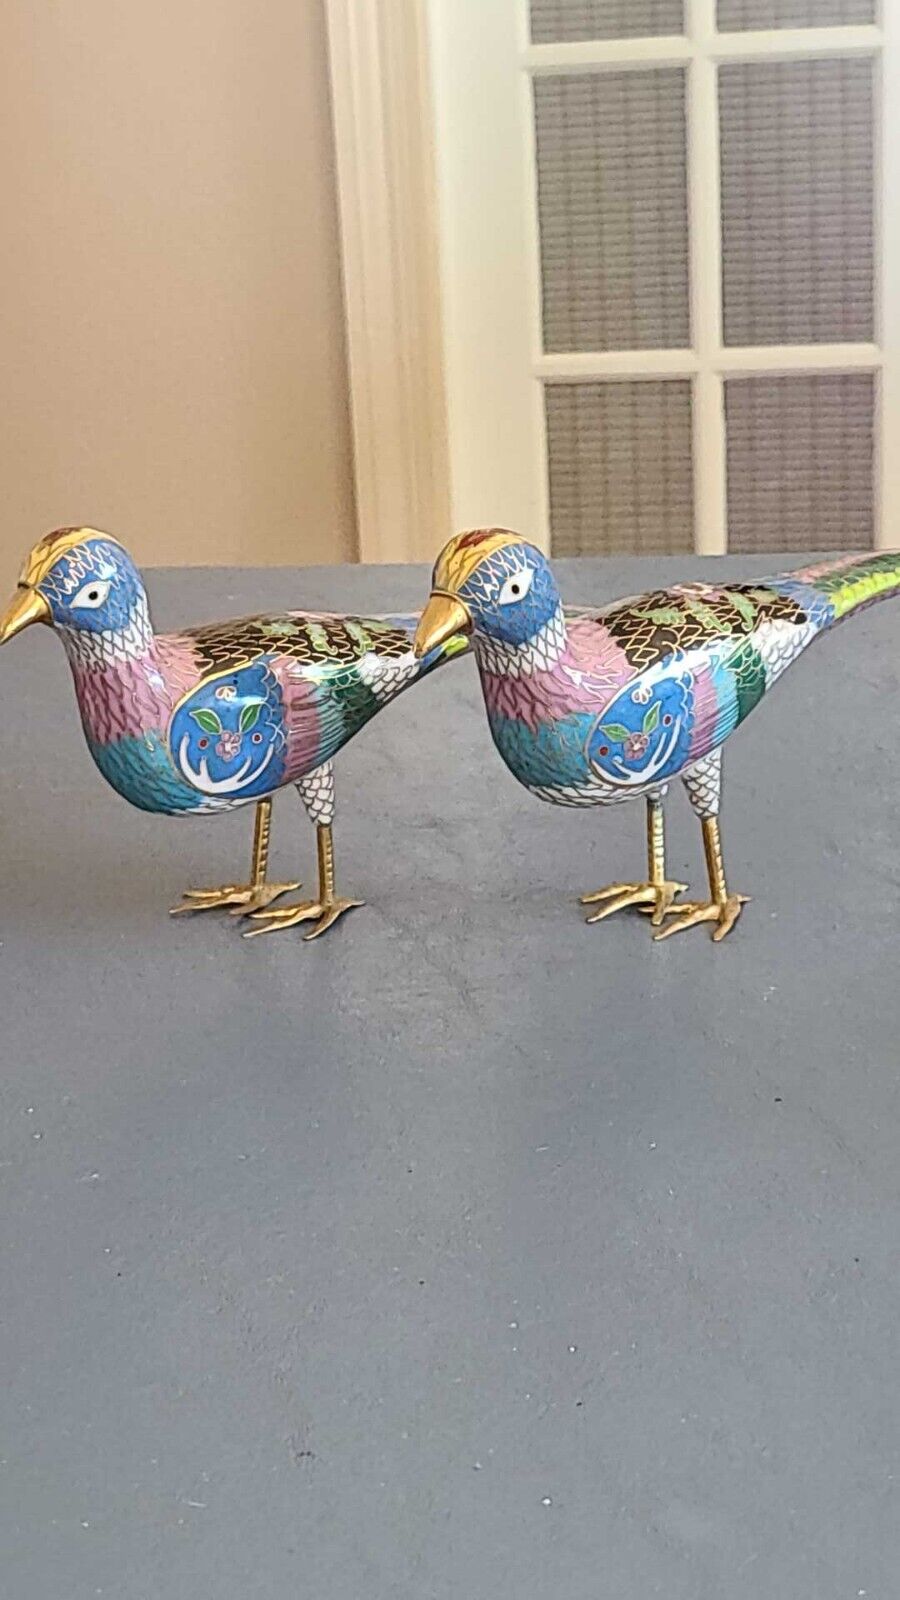 VTG Pair Of Chinese Cloisonne Long Tailed Bird Figurines 9x5 Made In Beijing